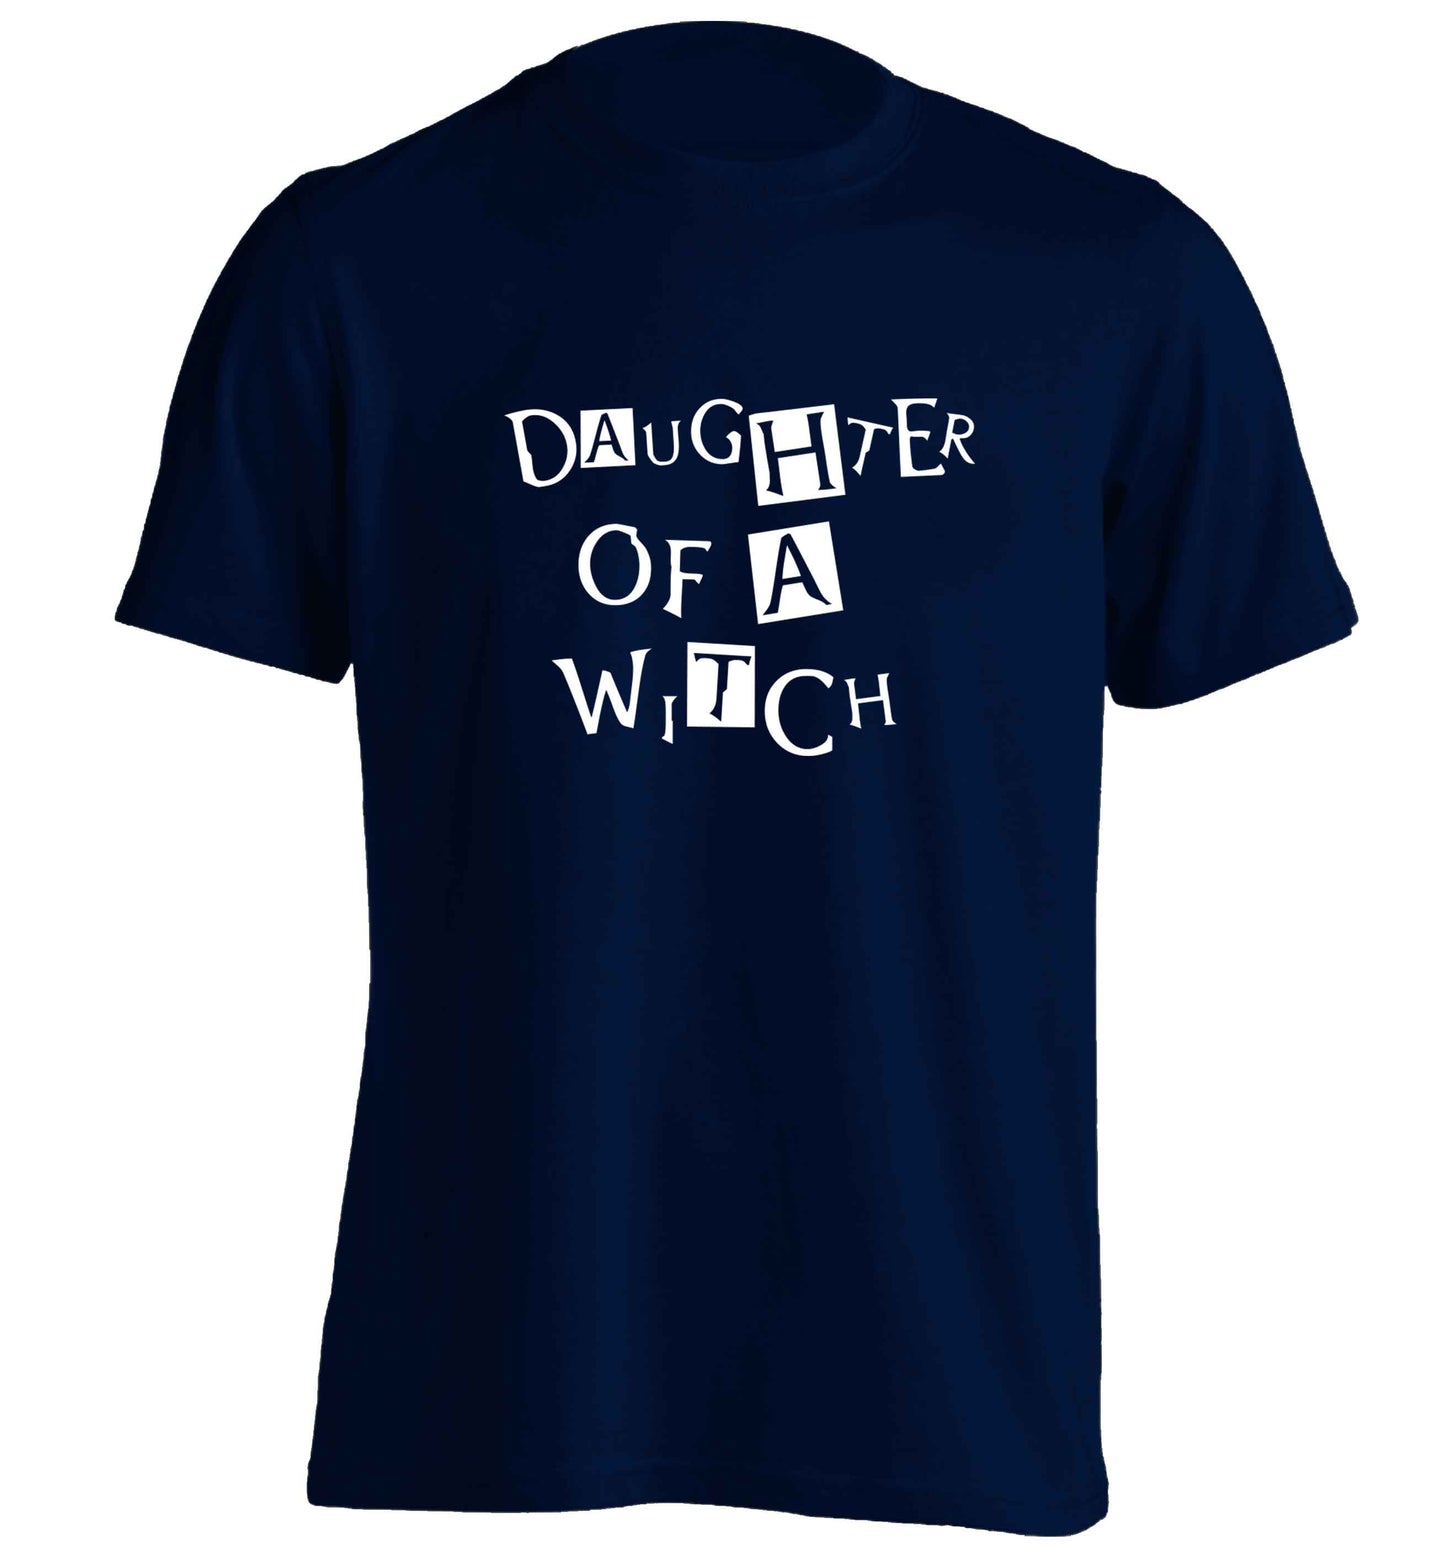 Daughter of a witch adults unisex navy Tshirt 2XL